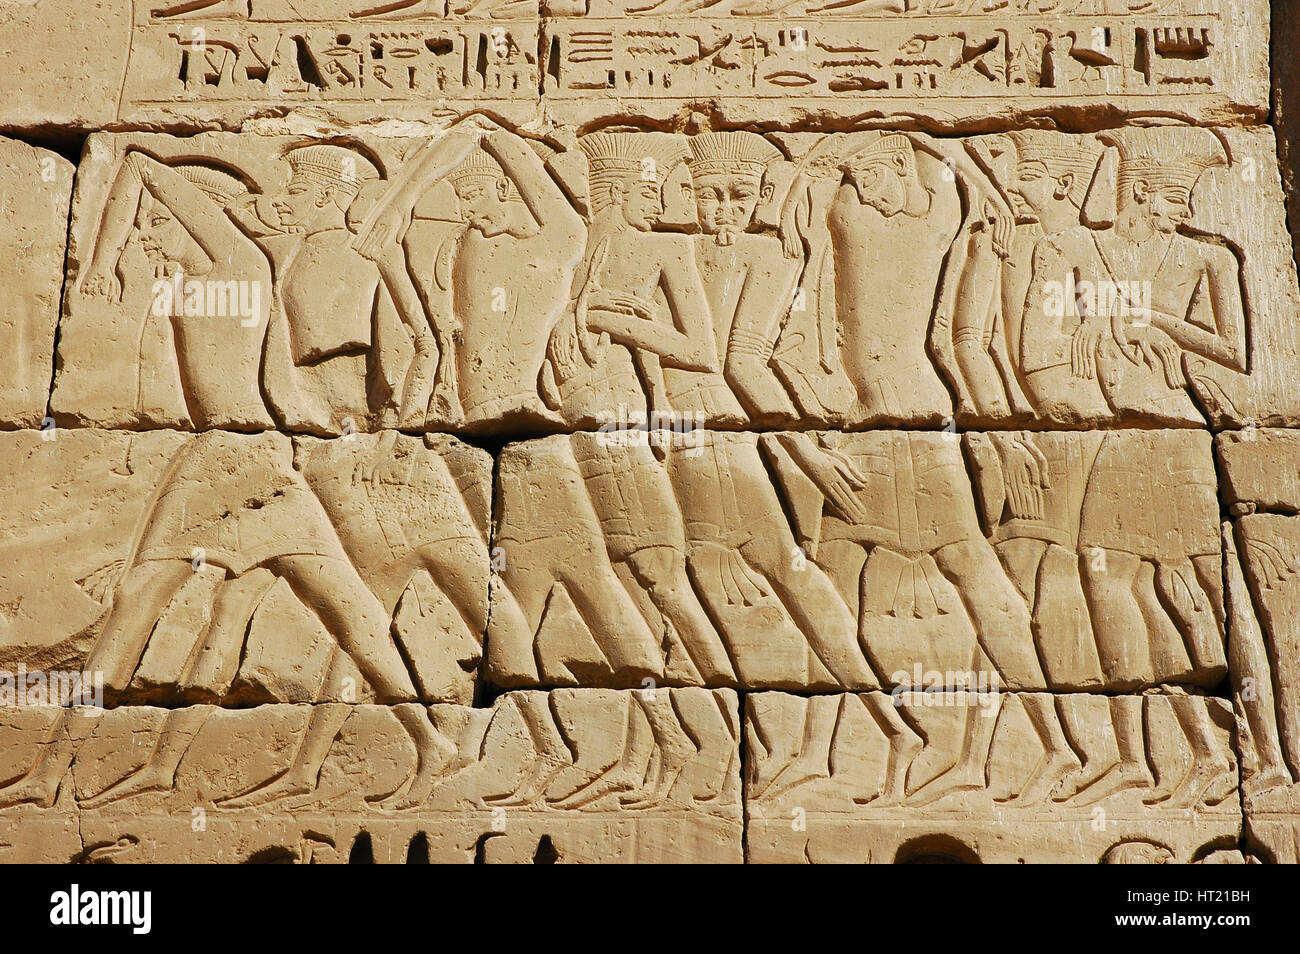 Detail of a relief on the mortuary temple of Ramesses III at Medinet Habu depicting Philistines in f Artist: Werner Forman. Stock Photo